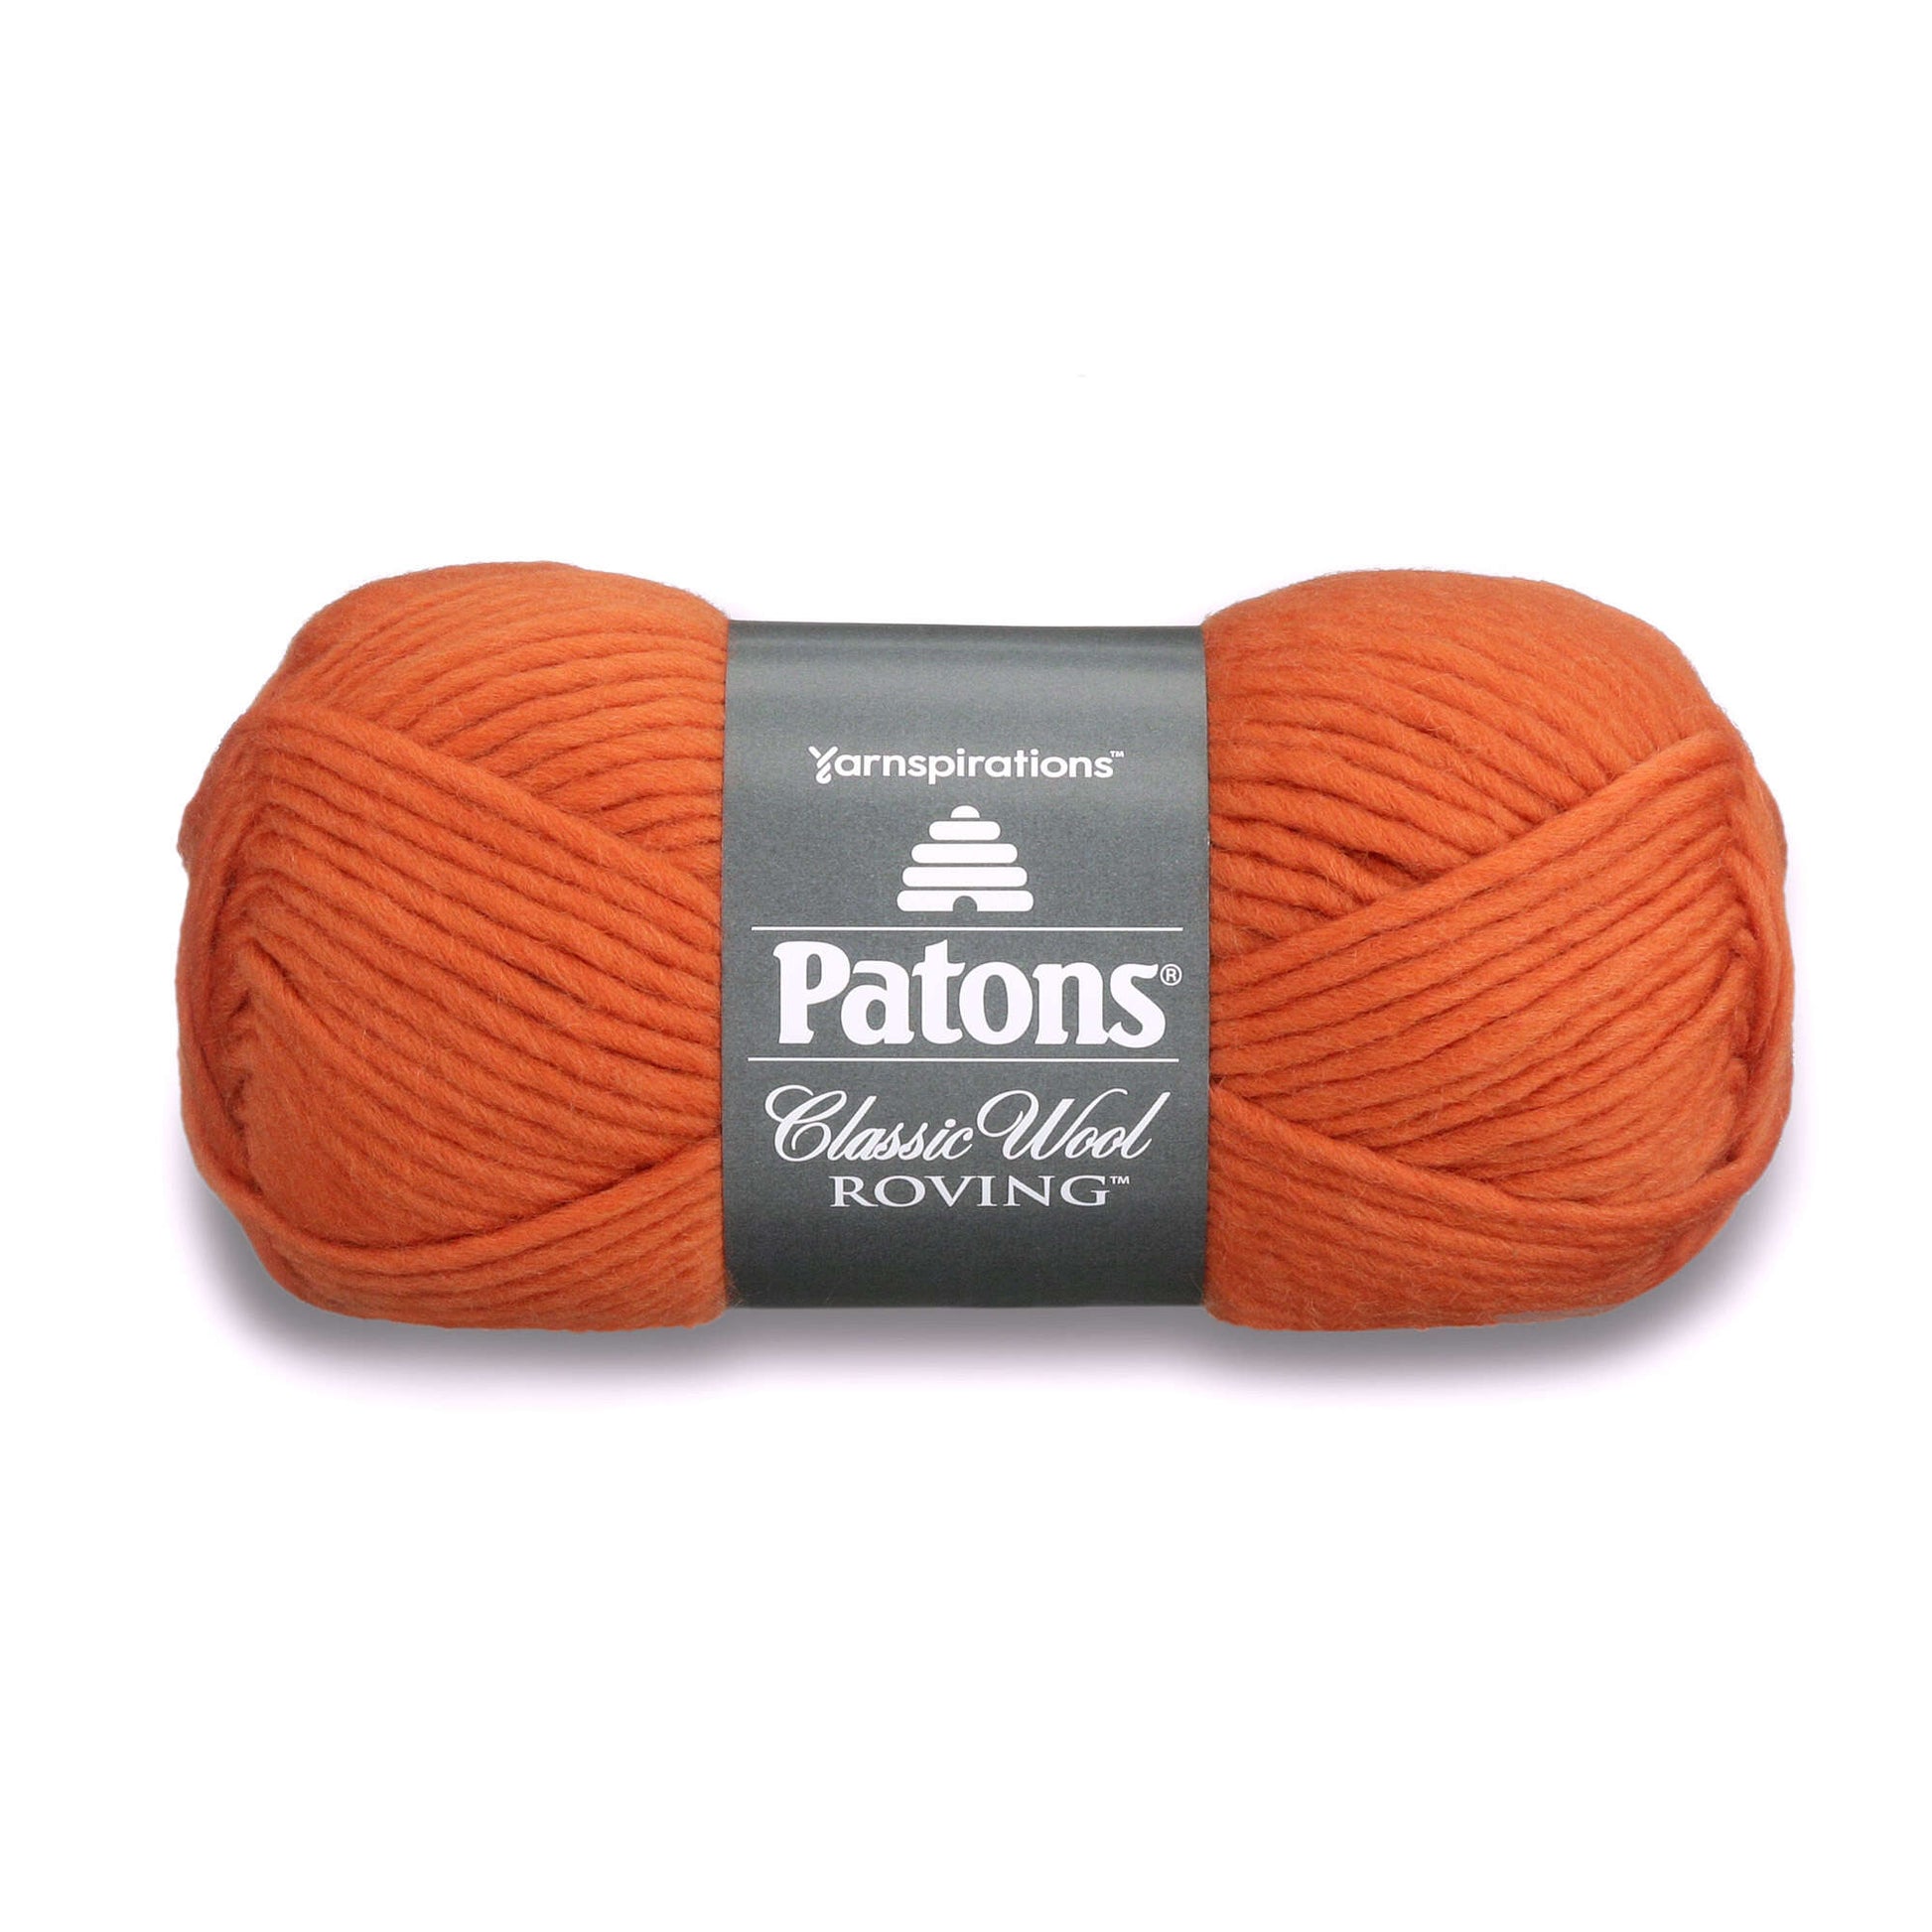 Patons Classic Wool Roving Yarn - Discontinued Shades